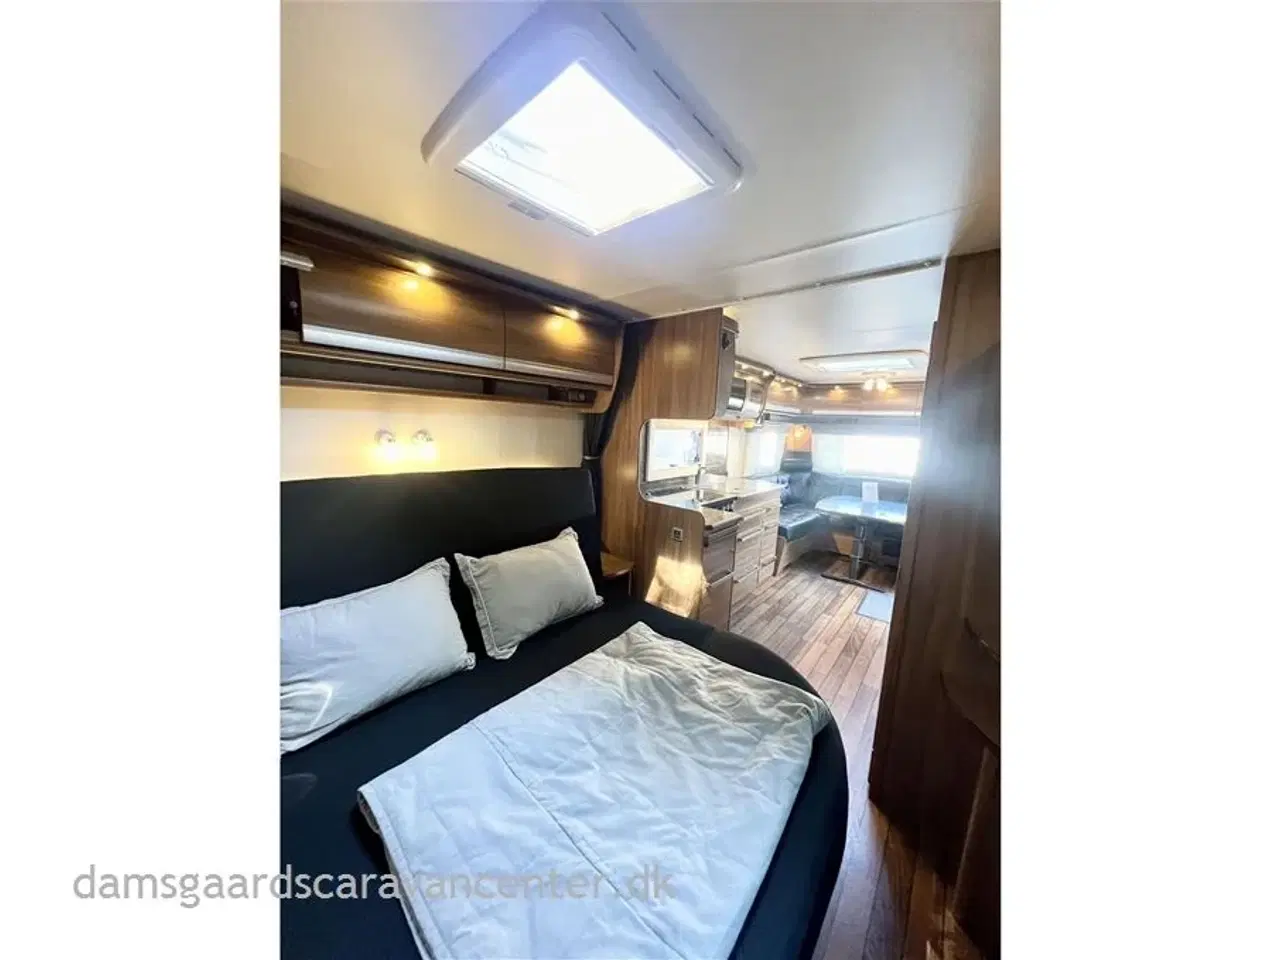 Billede 16 - 2016 - Cabby Caienna 740 QTF   Queensbed-Alde-Gulvvarme-Mover